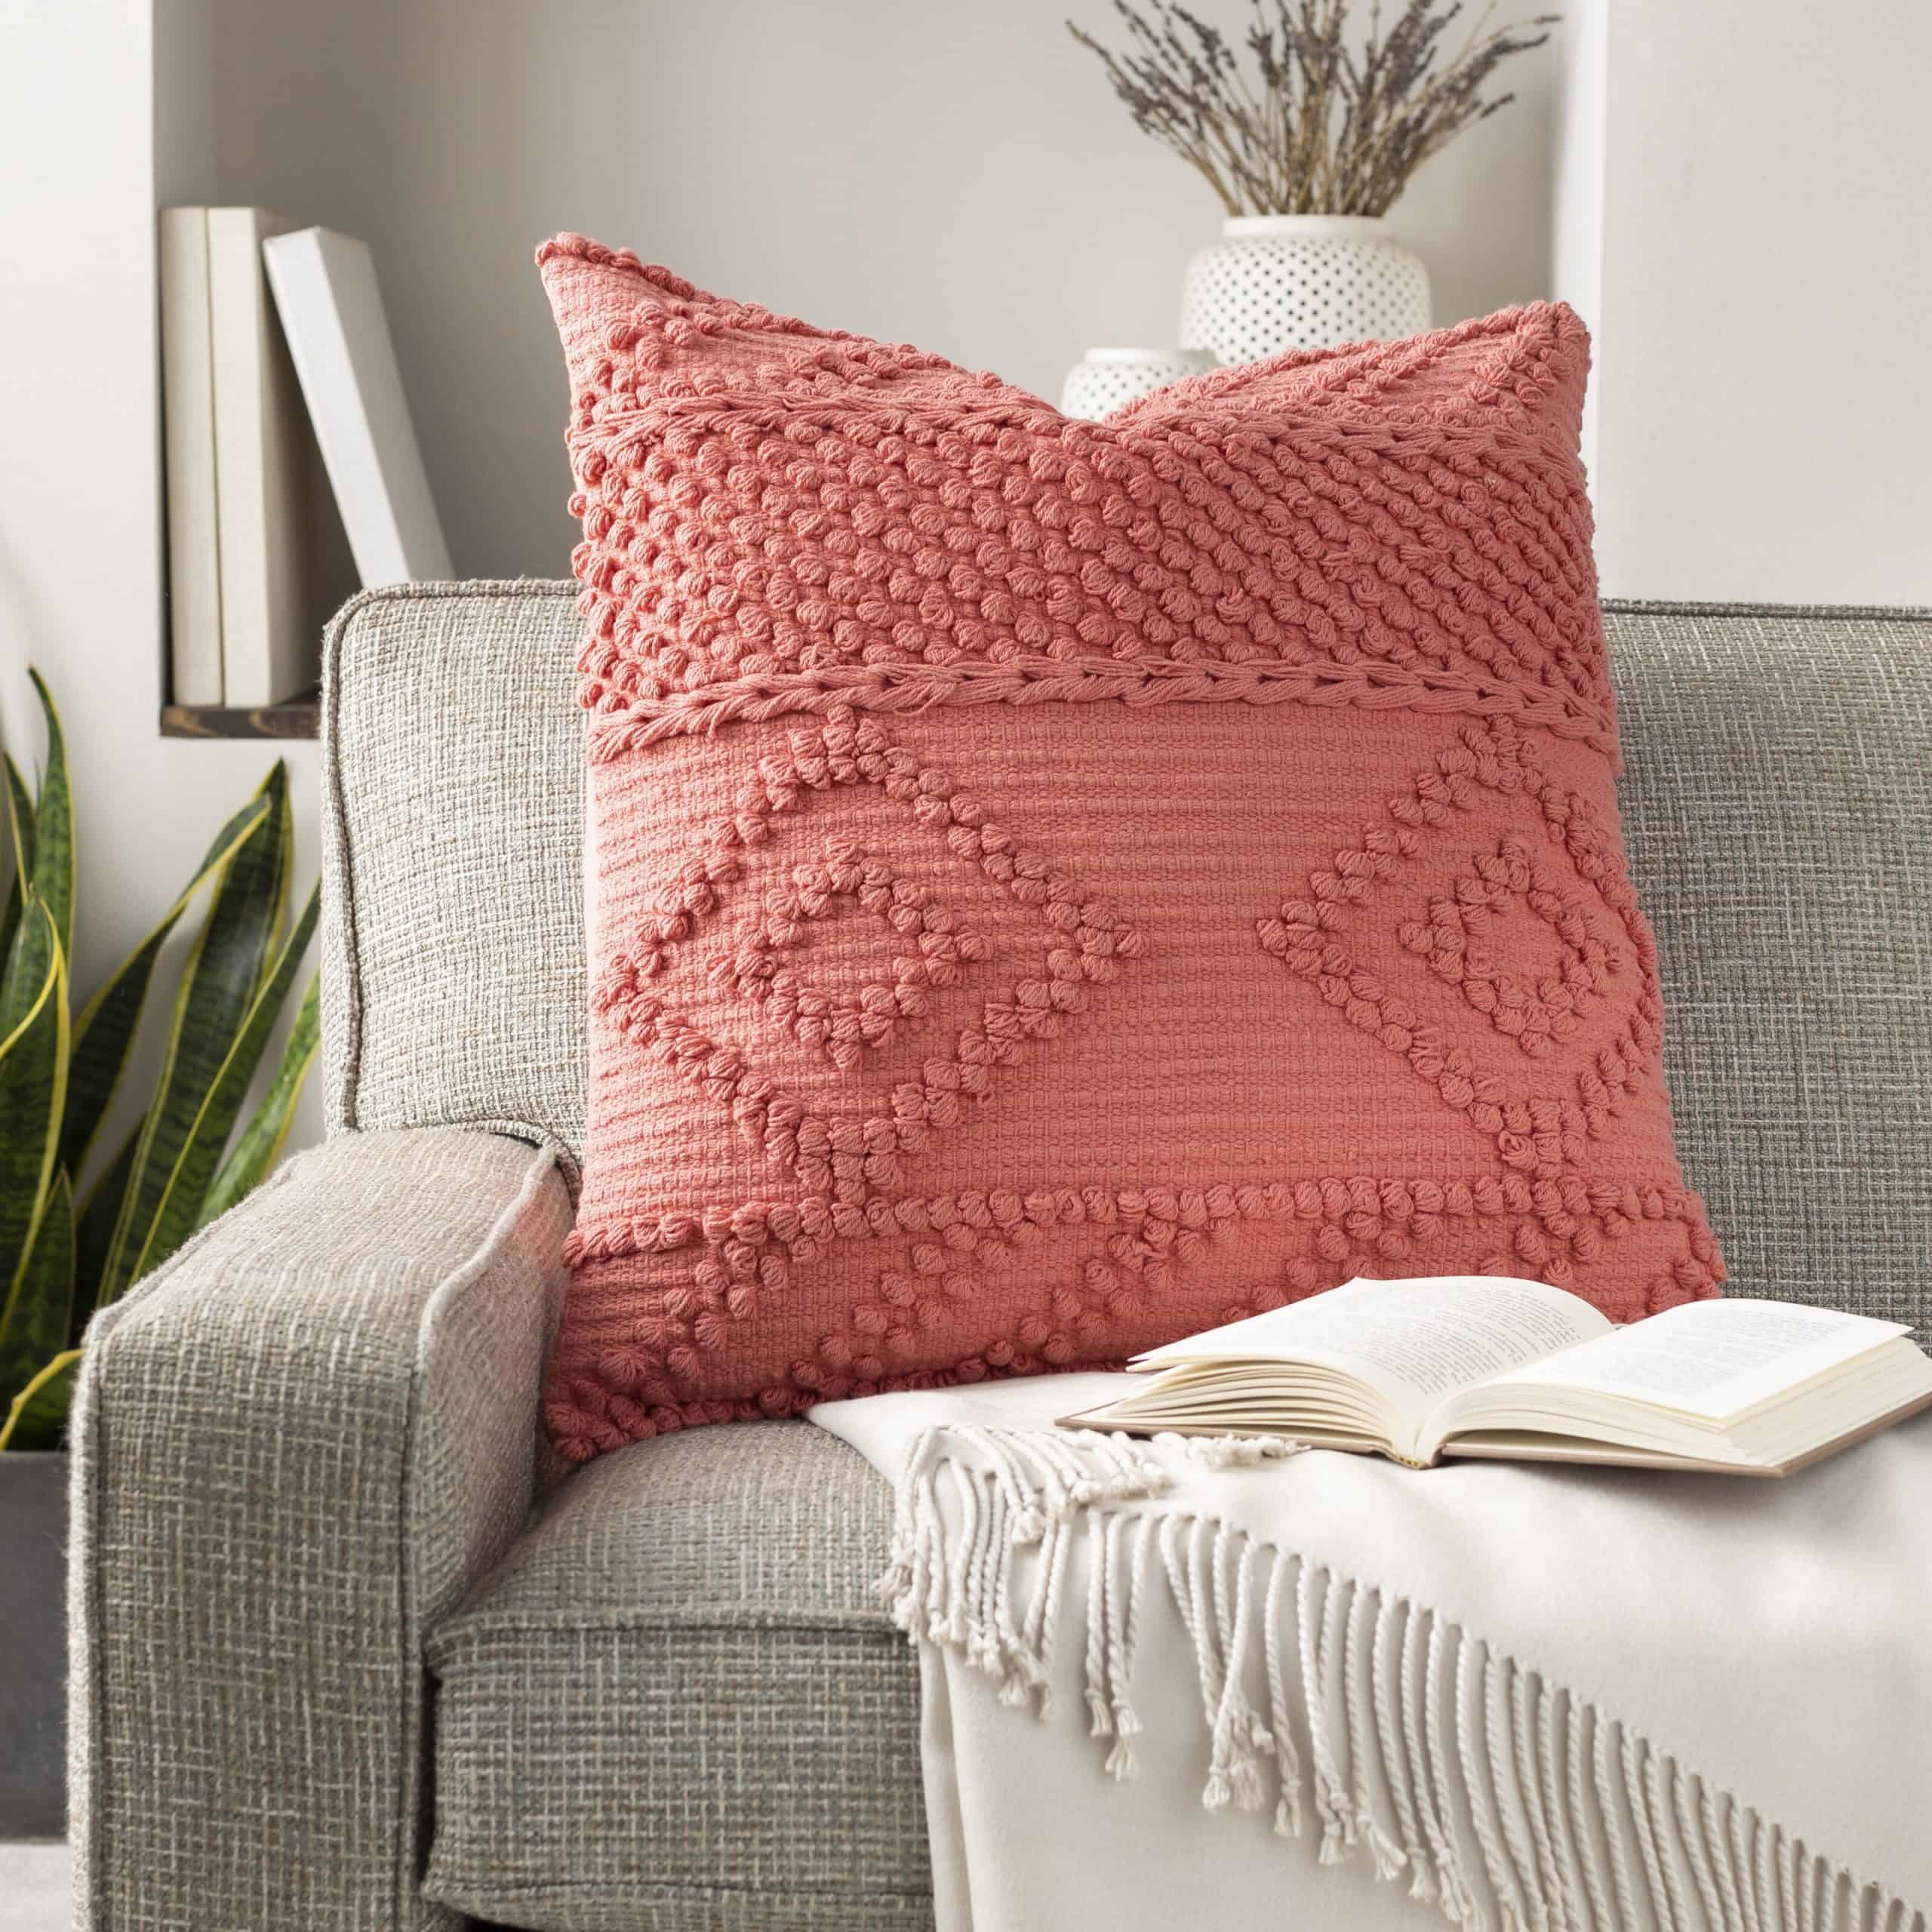 Pink Textured Throw Pillows Look Amazing In A Boho Room